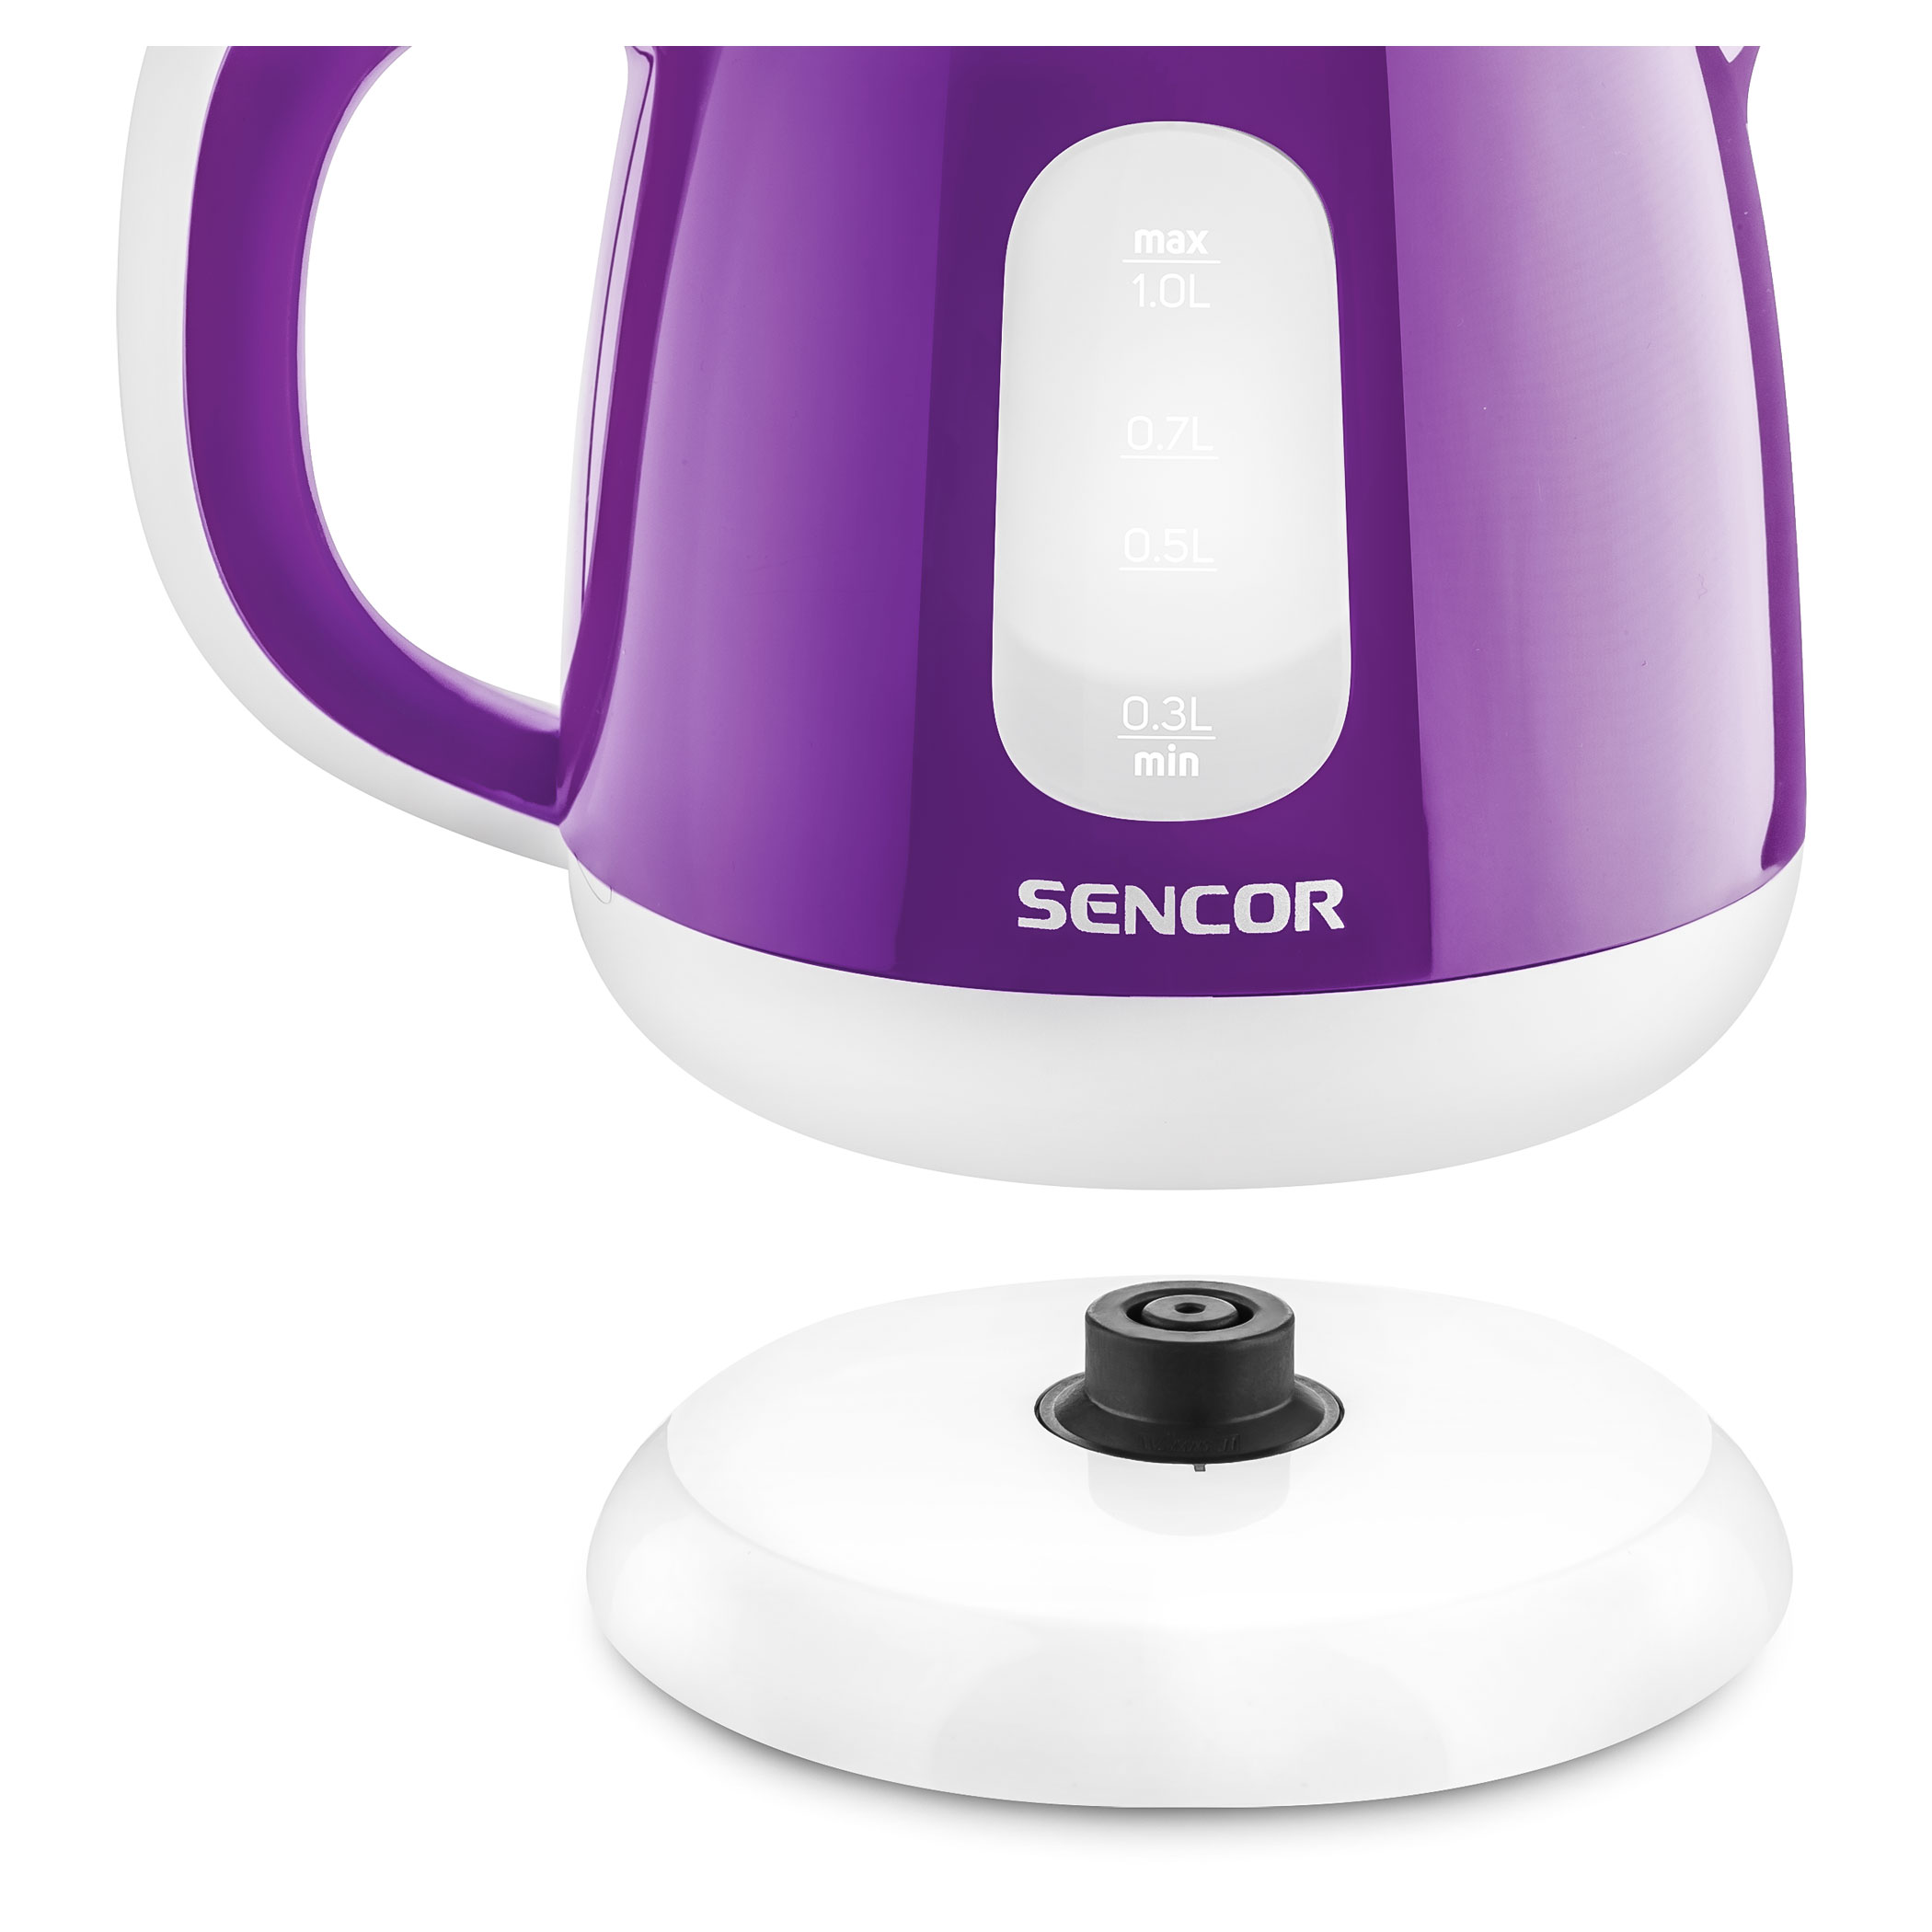 Purple electric kettle stock image. Image of household - 131829051